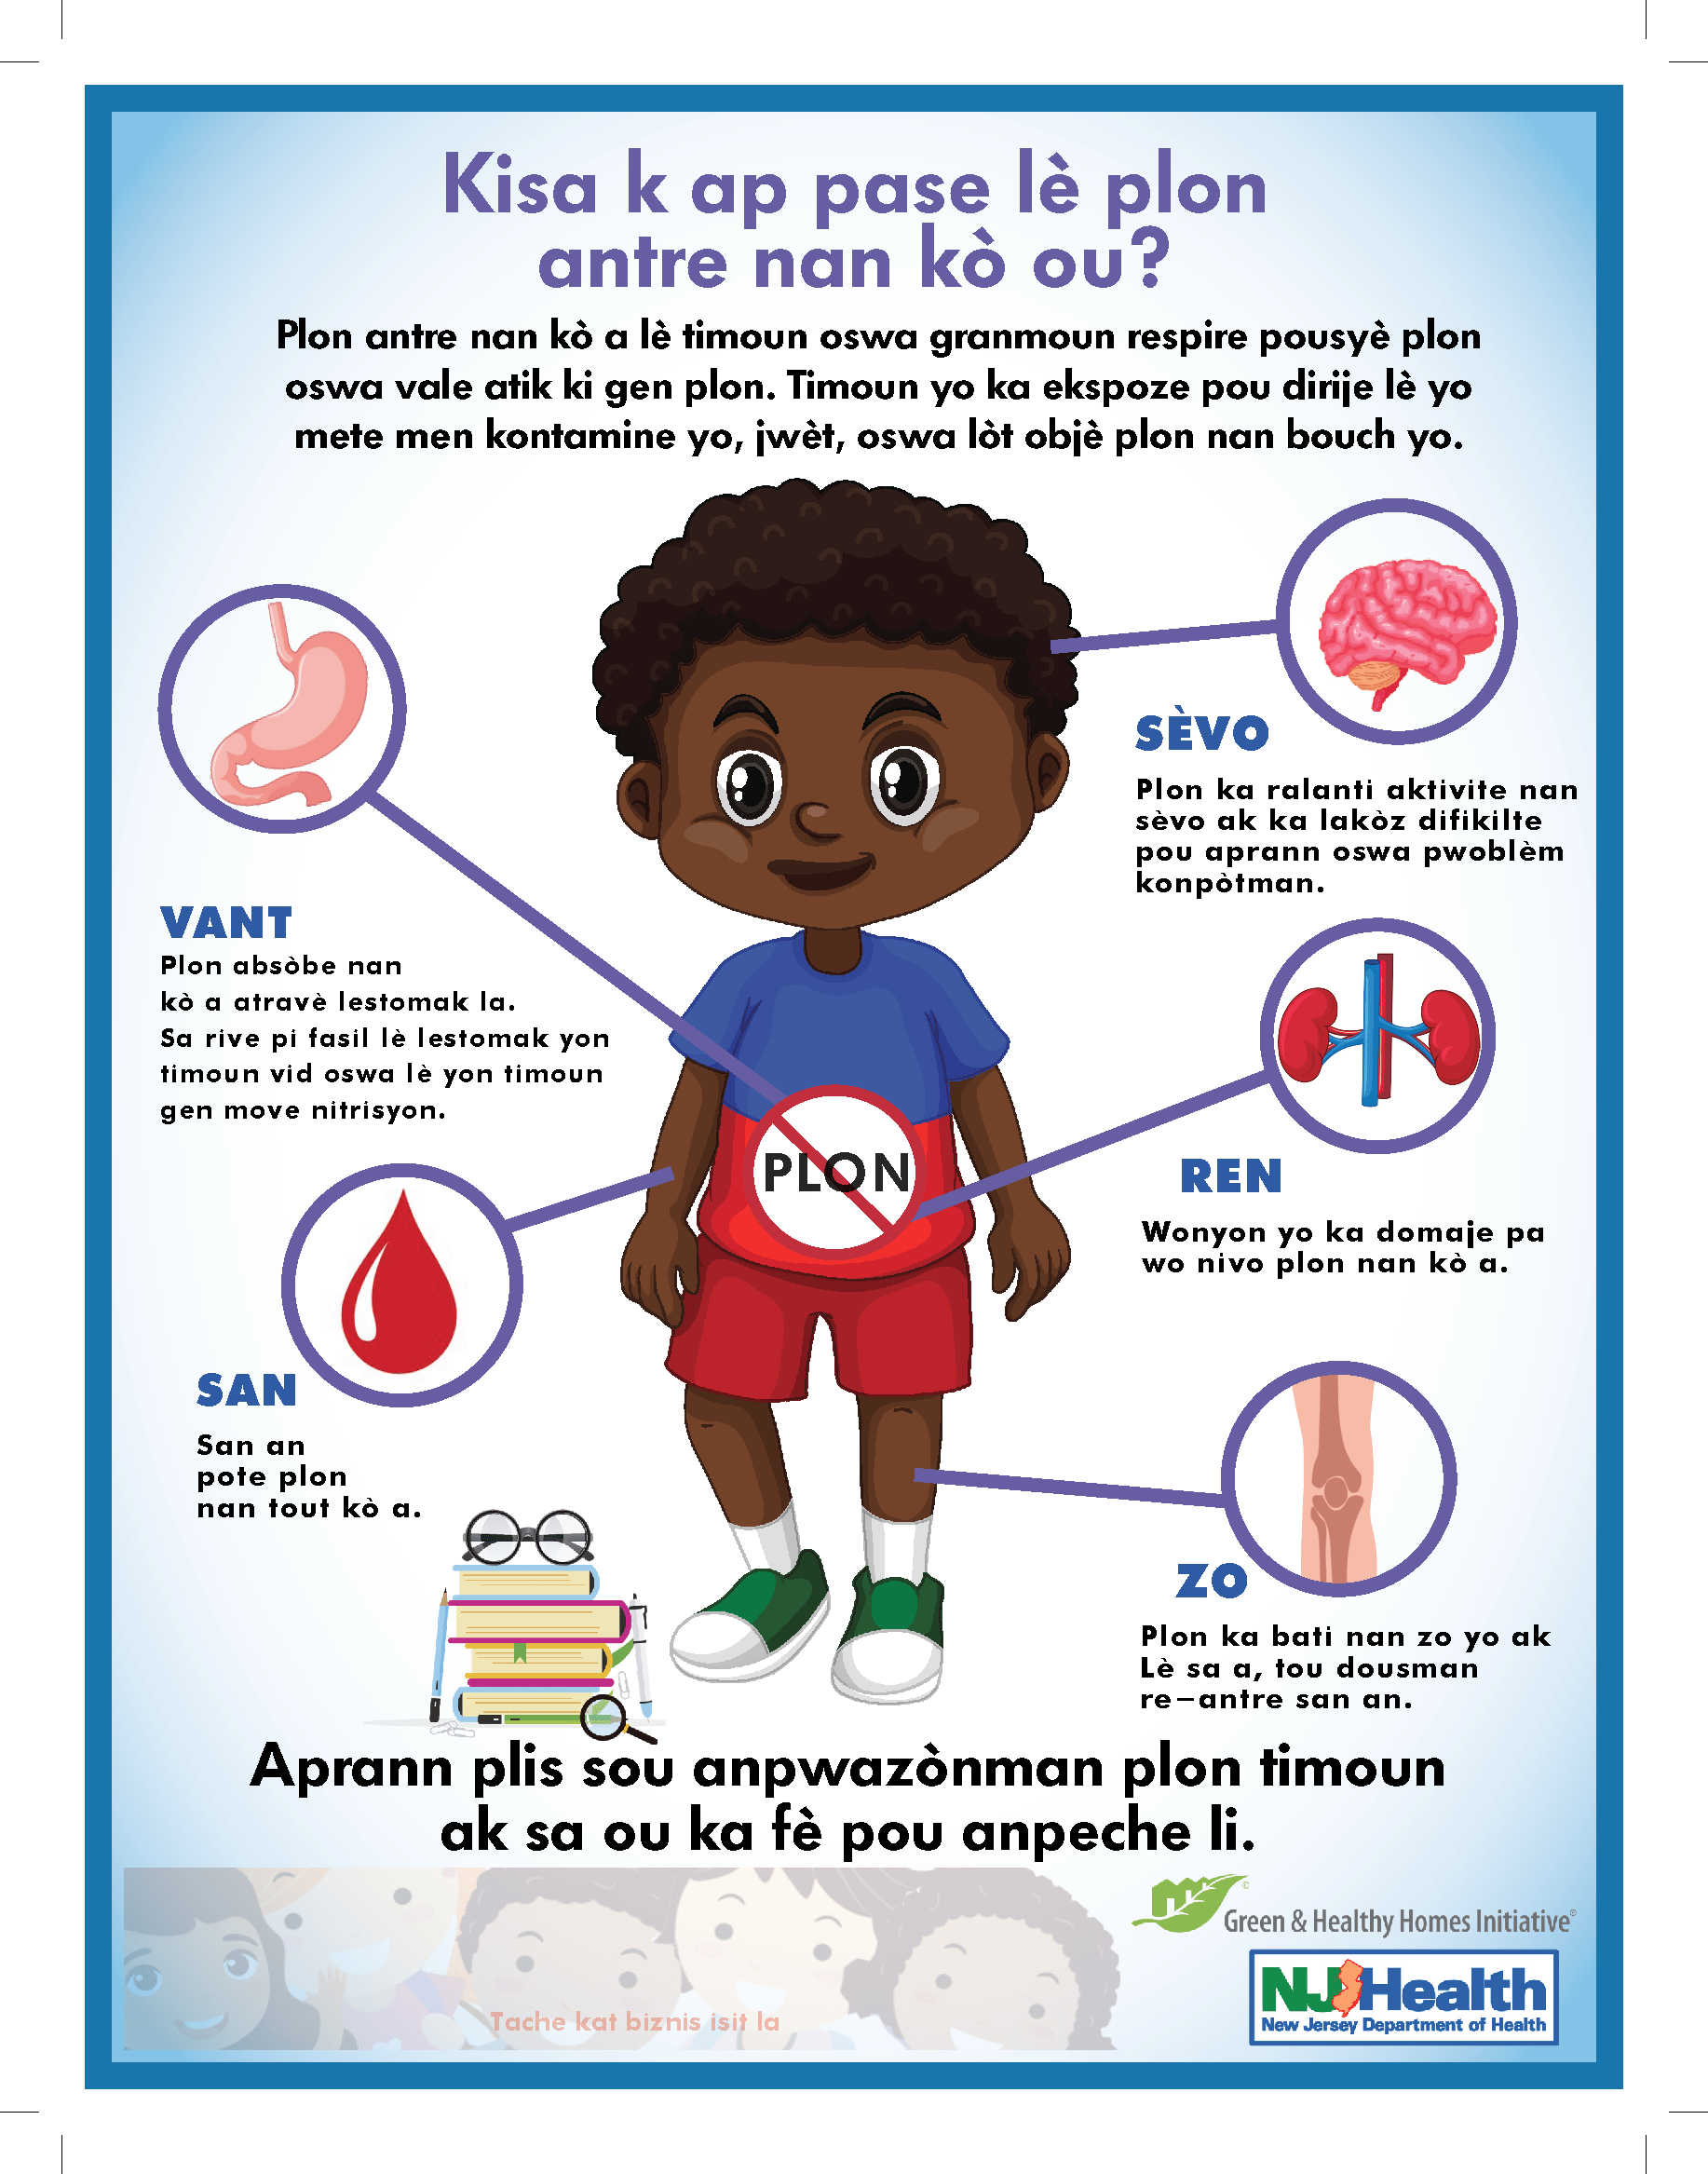 Image of a young boy surrounded by images illustrating the effects of lead on the body.